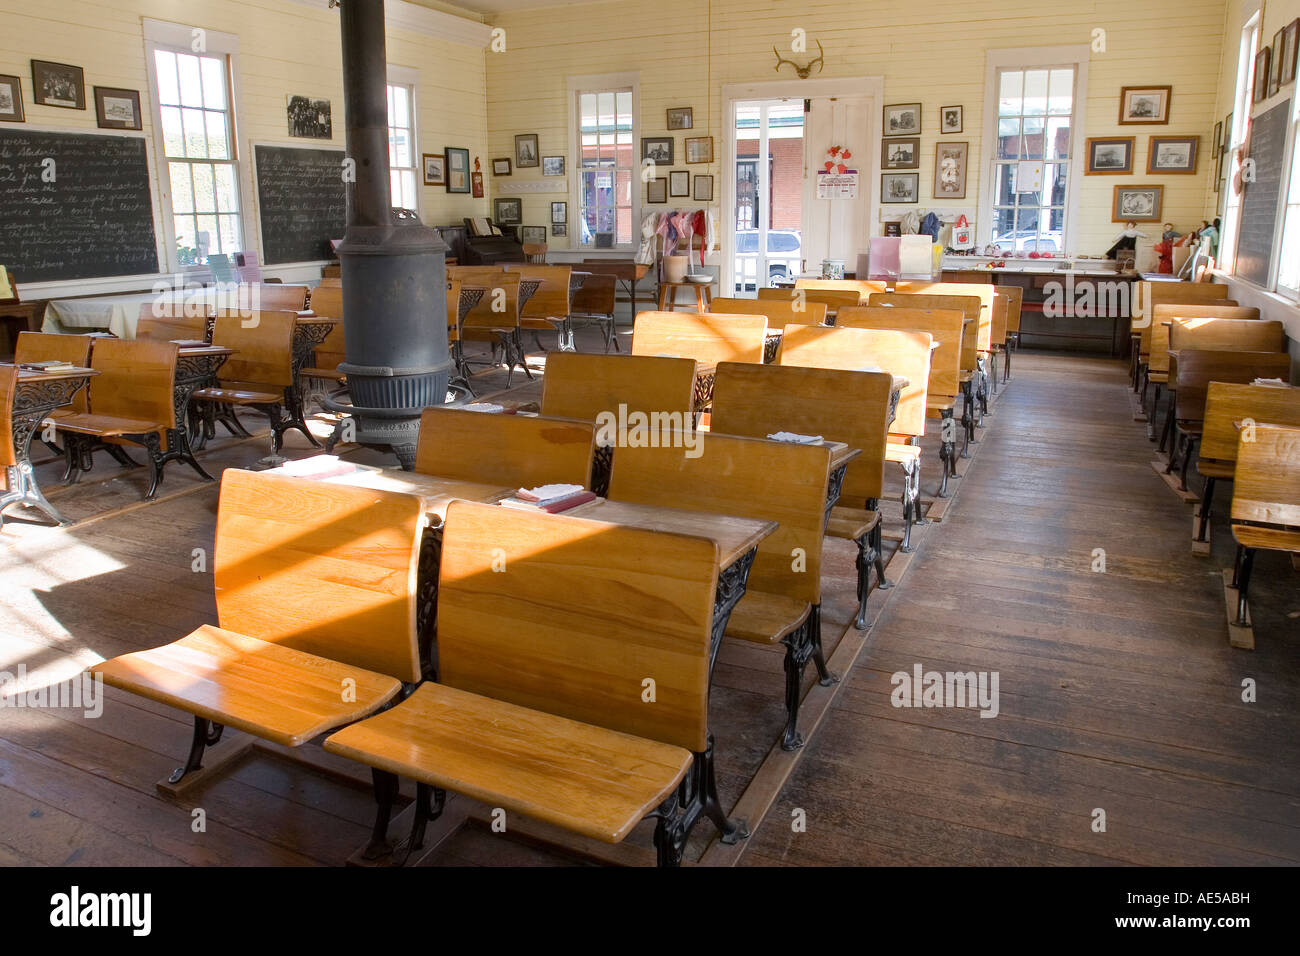 Classroom in replica of 1800s era one room schoolhouse with childrens desks chalkboards and wood stove Old Town Sacramento Stock Photo